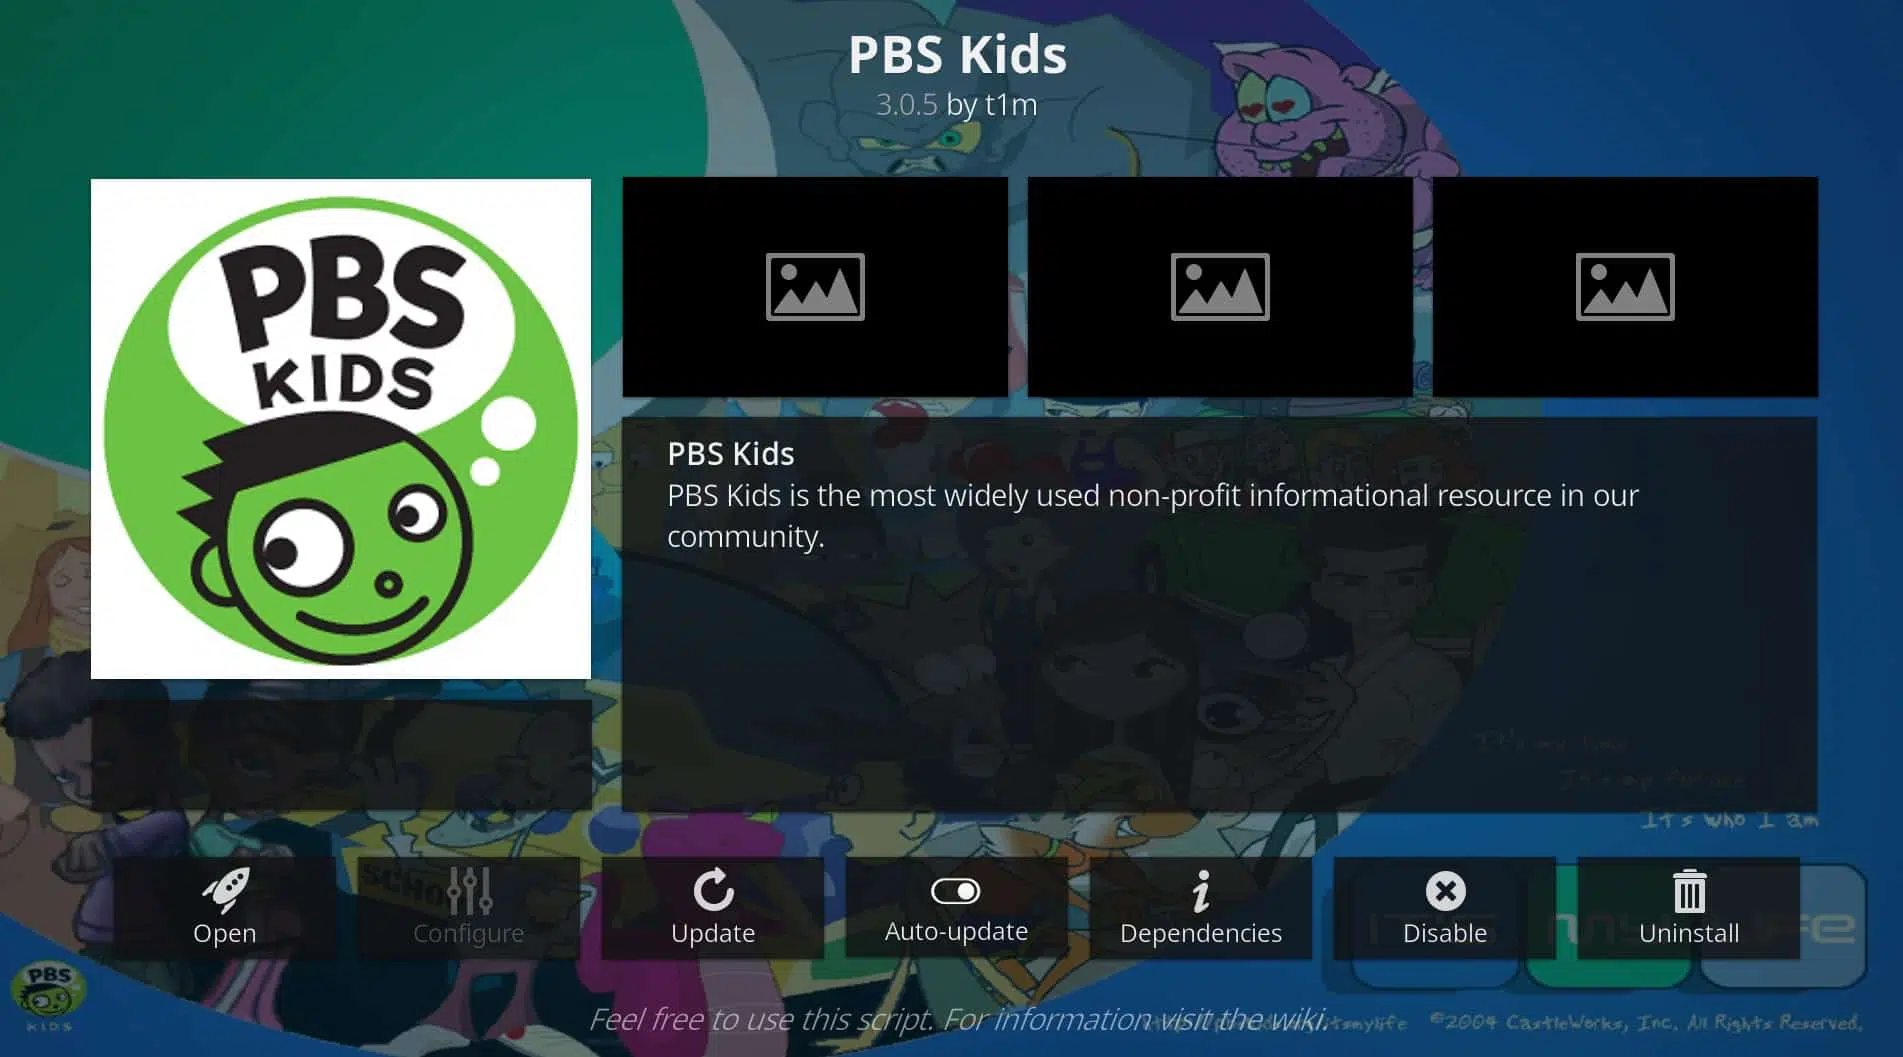 How to install the PBS Kids Kodi add-on